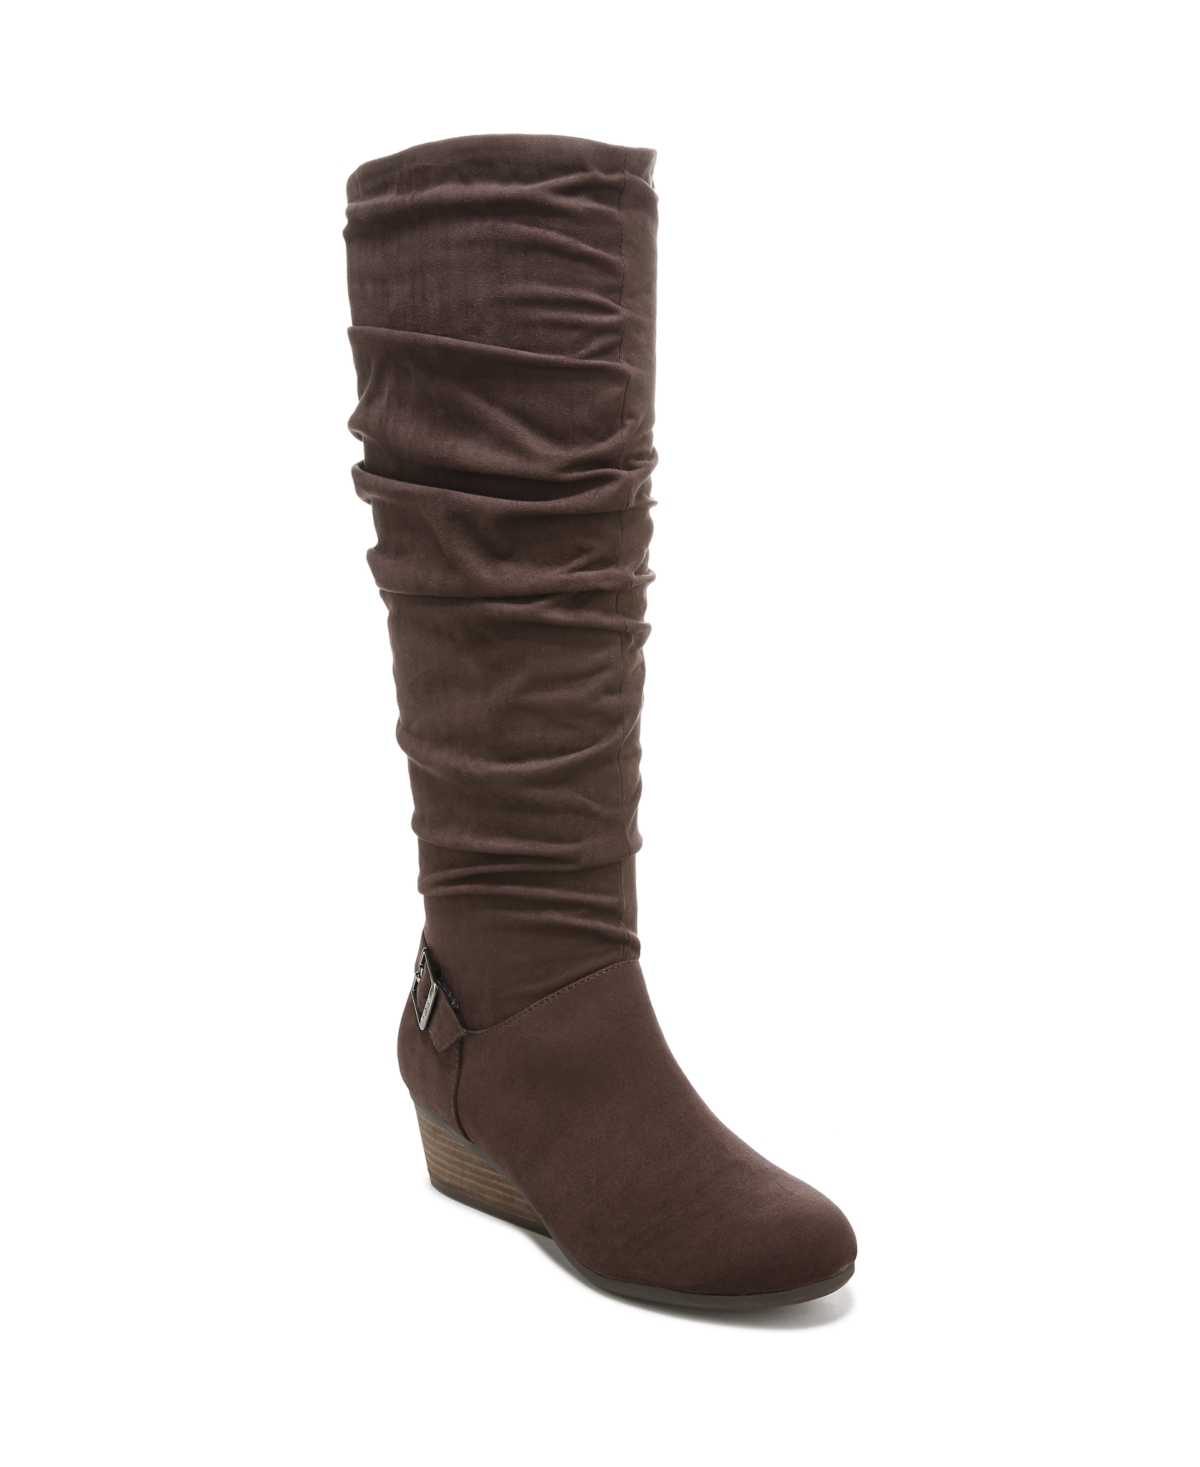 UPC 736715606403 product image for Dr. Scholl's Women's Break Free High Shaft Boots Women's Shoes | upcitemdb.com